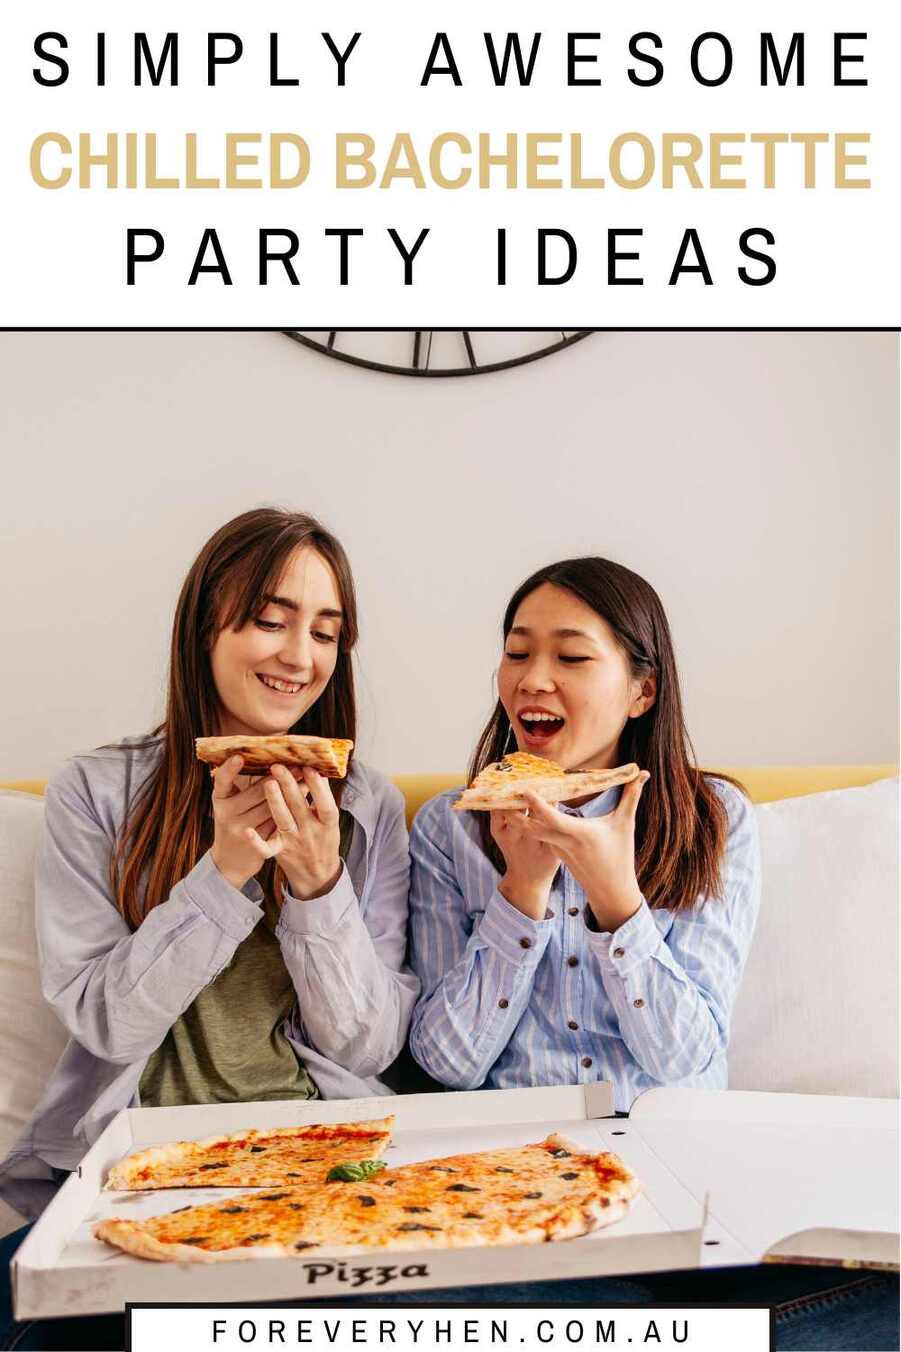 Two women eating pizza on the couch. Text overlay: Simply awesome chilled bachelorette party ideas